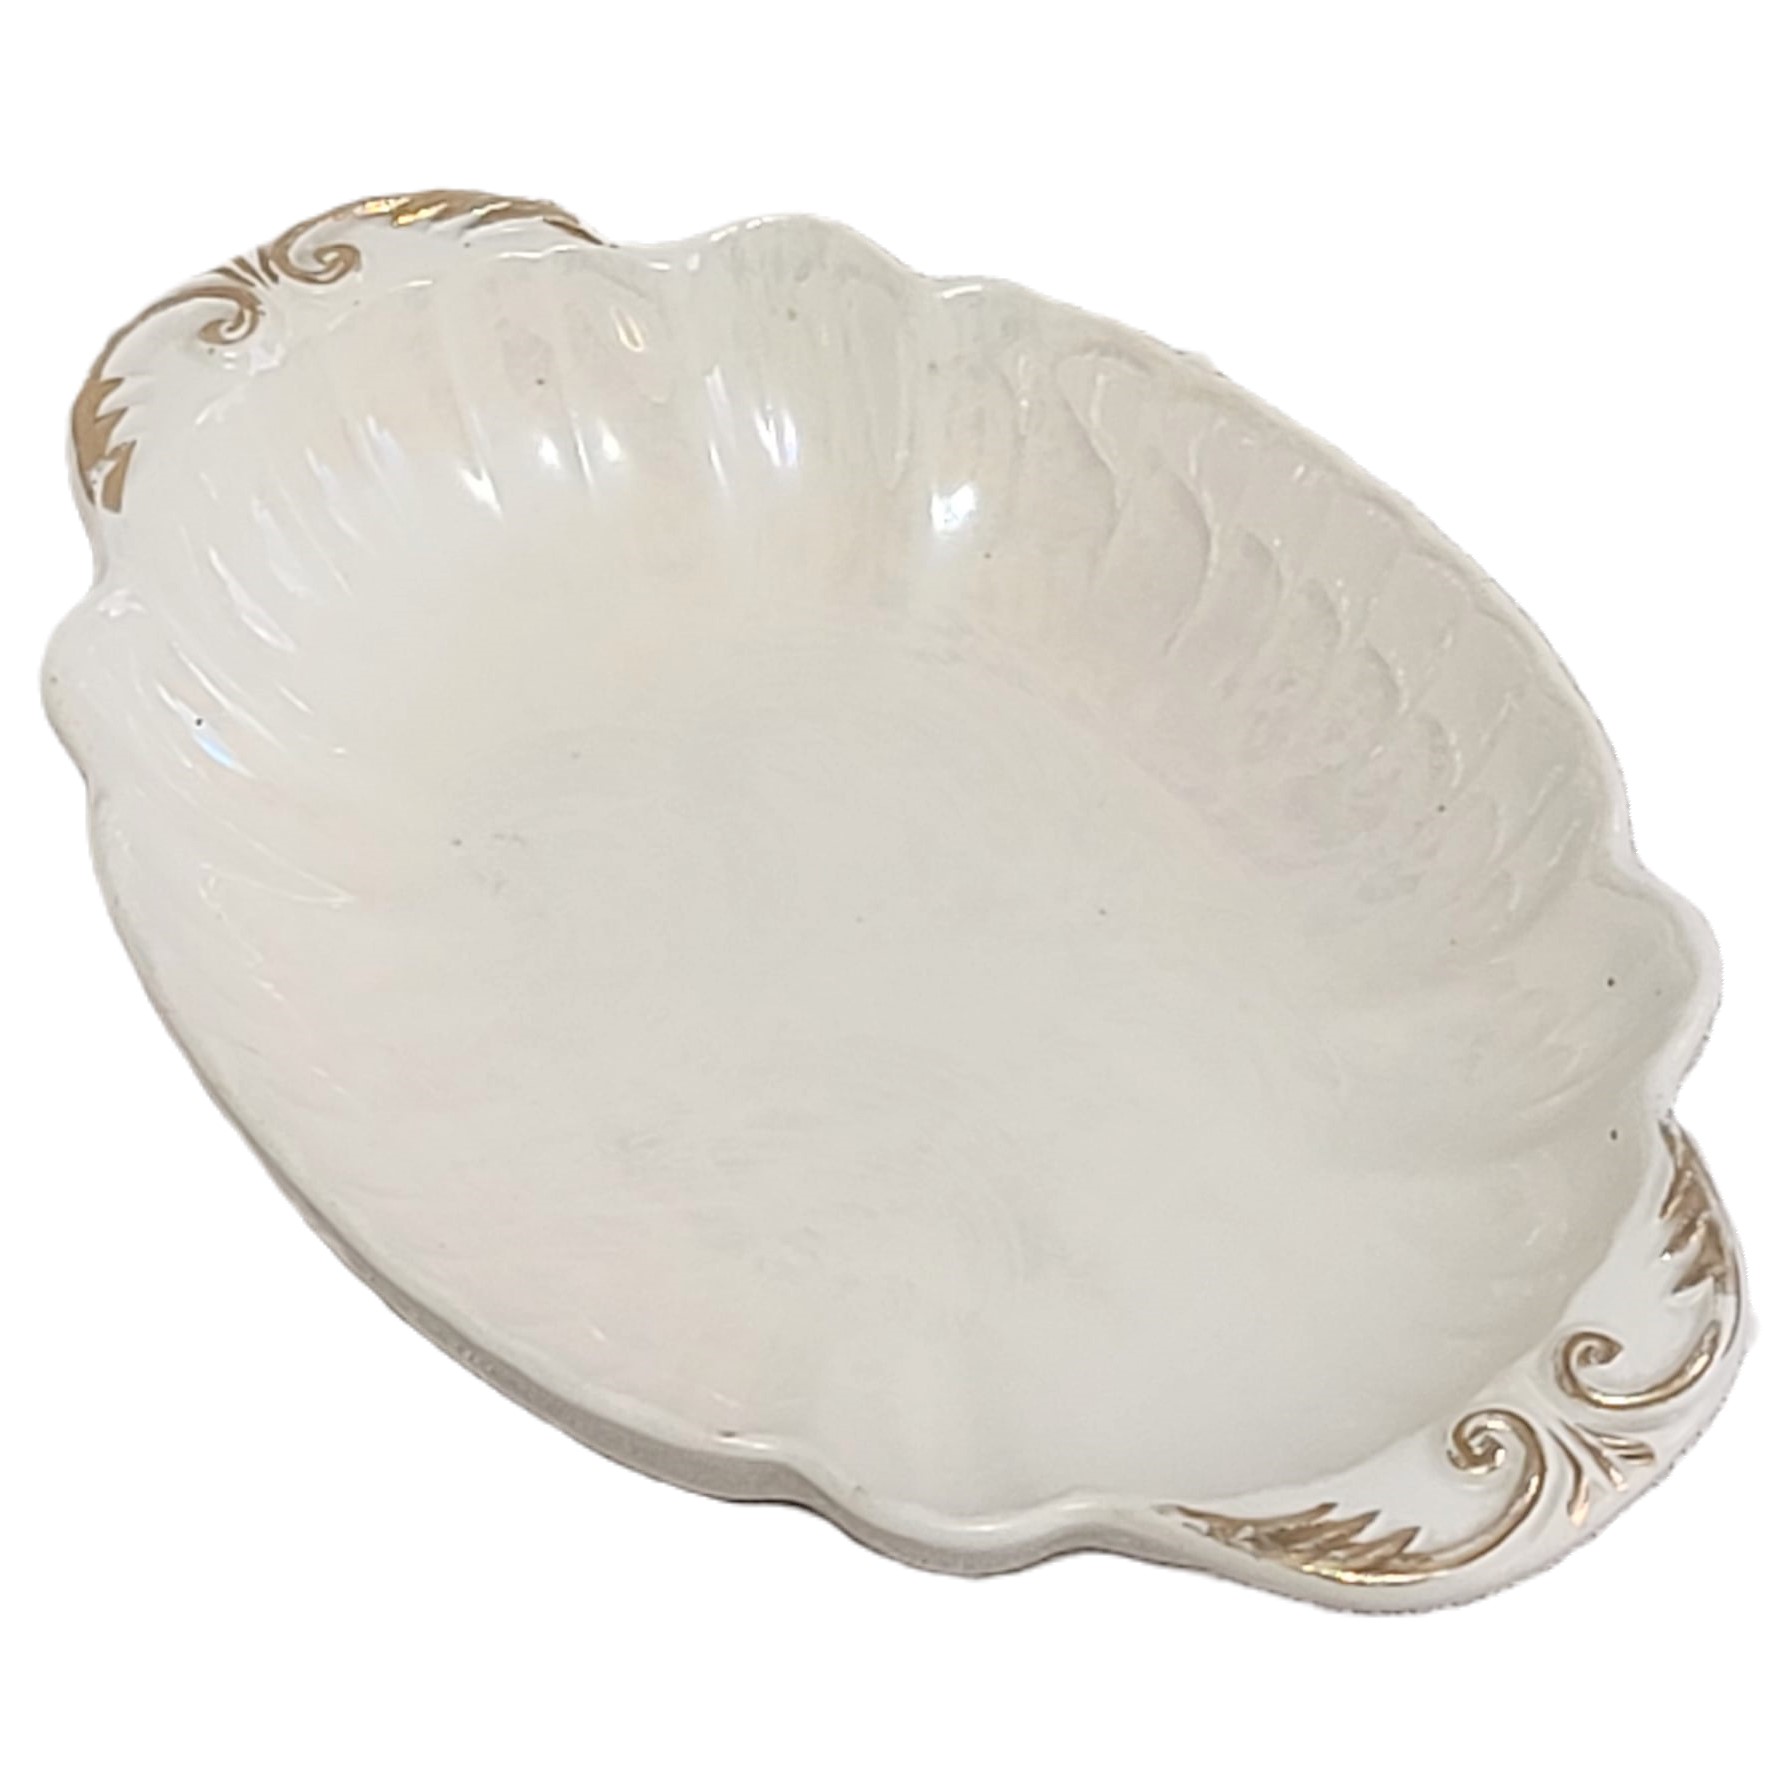 Pearlized Ivory Candy Dish Marked 24KT Gold